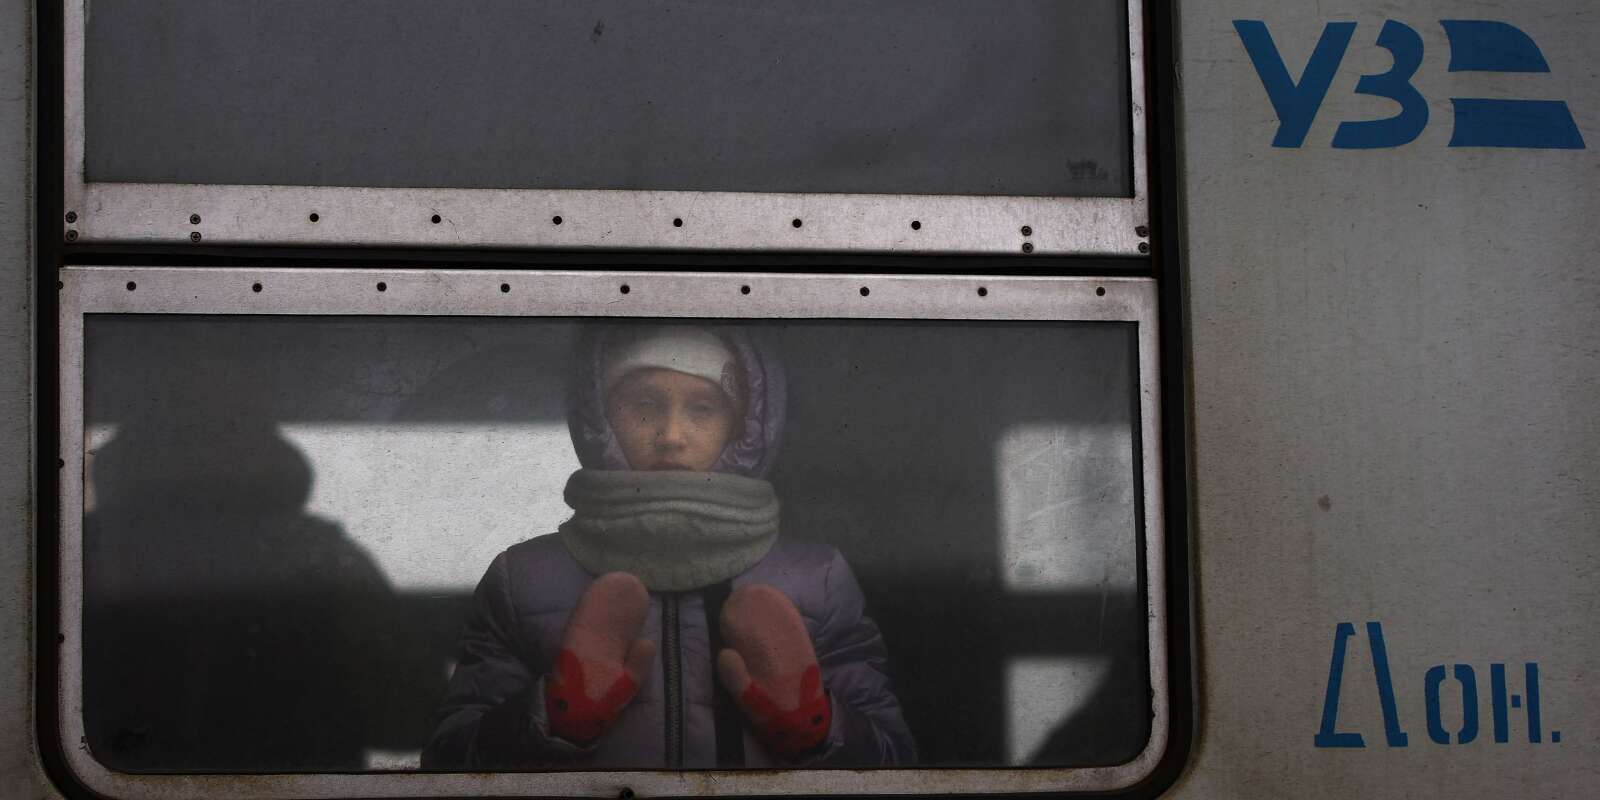 Refugees evacuated on a train from the Kyiv area, following the Russian invasion of Ukraine, arrive at the train station in Lviv, Ukraine, March 7, 2022. REUTERS/Kai Pfaffenbach